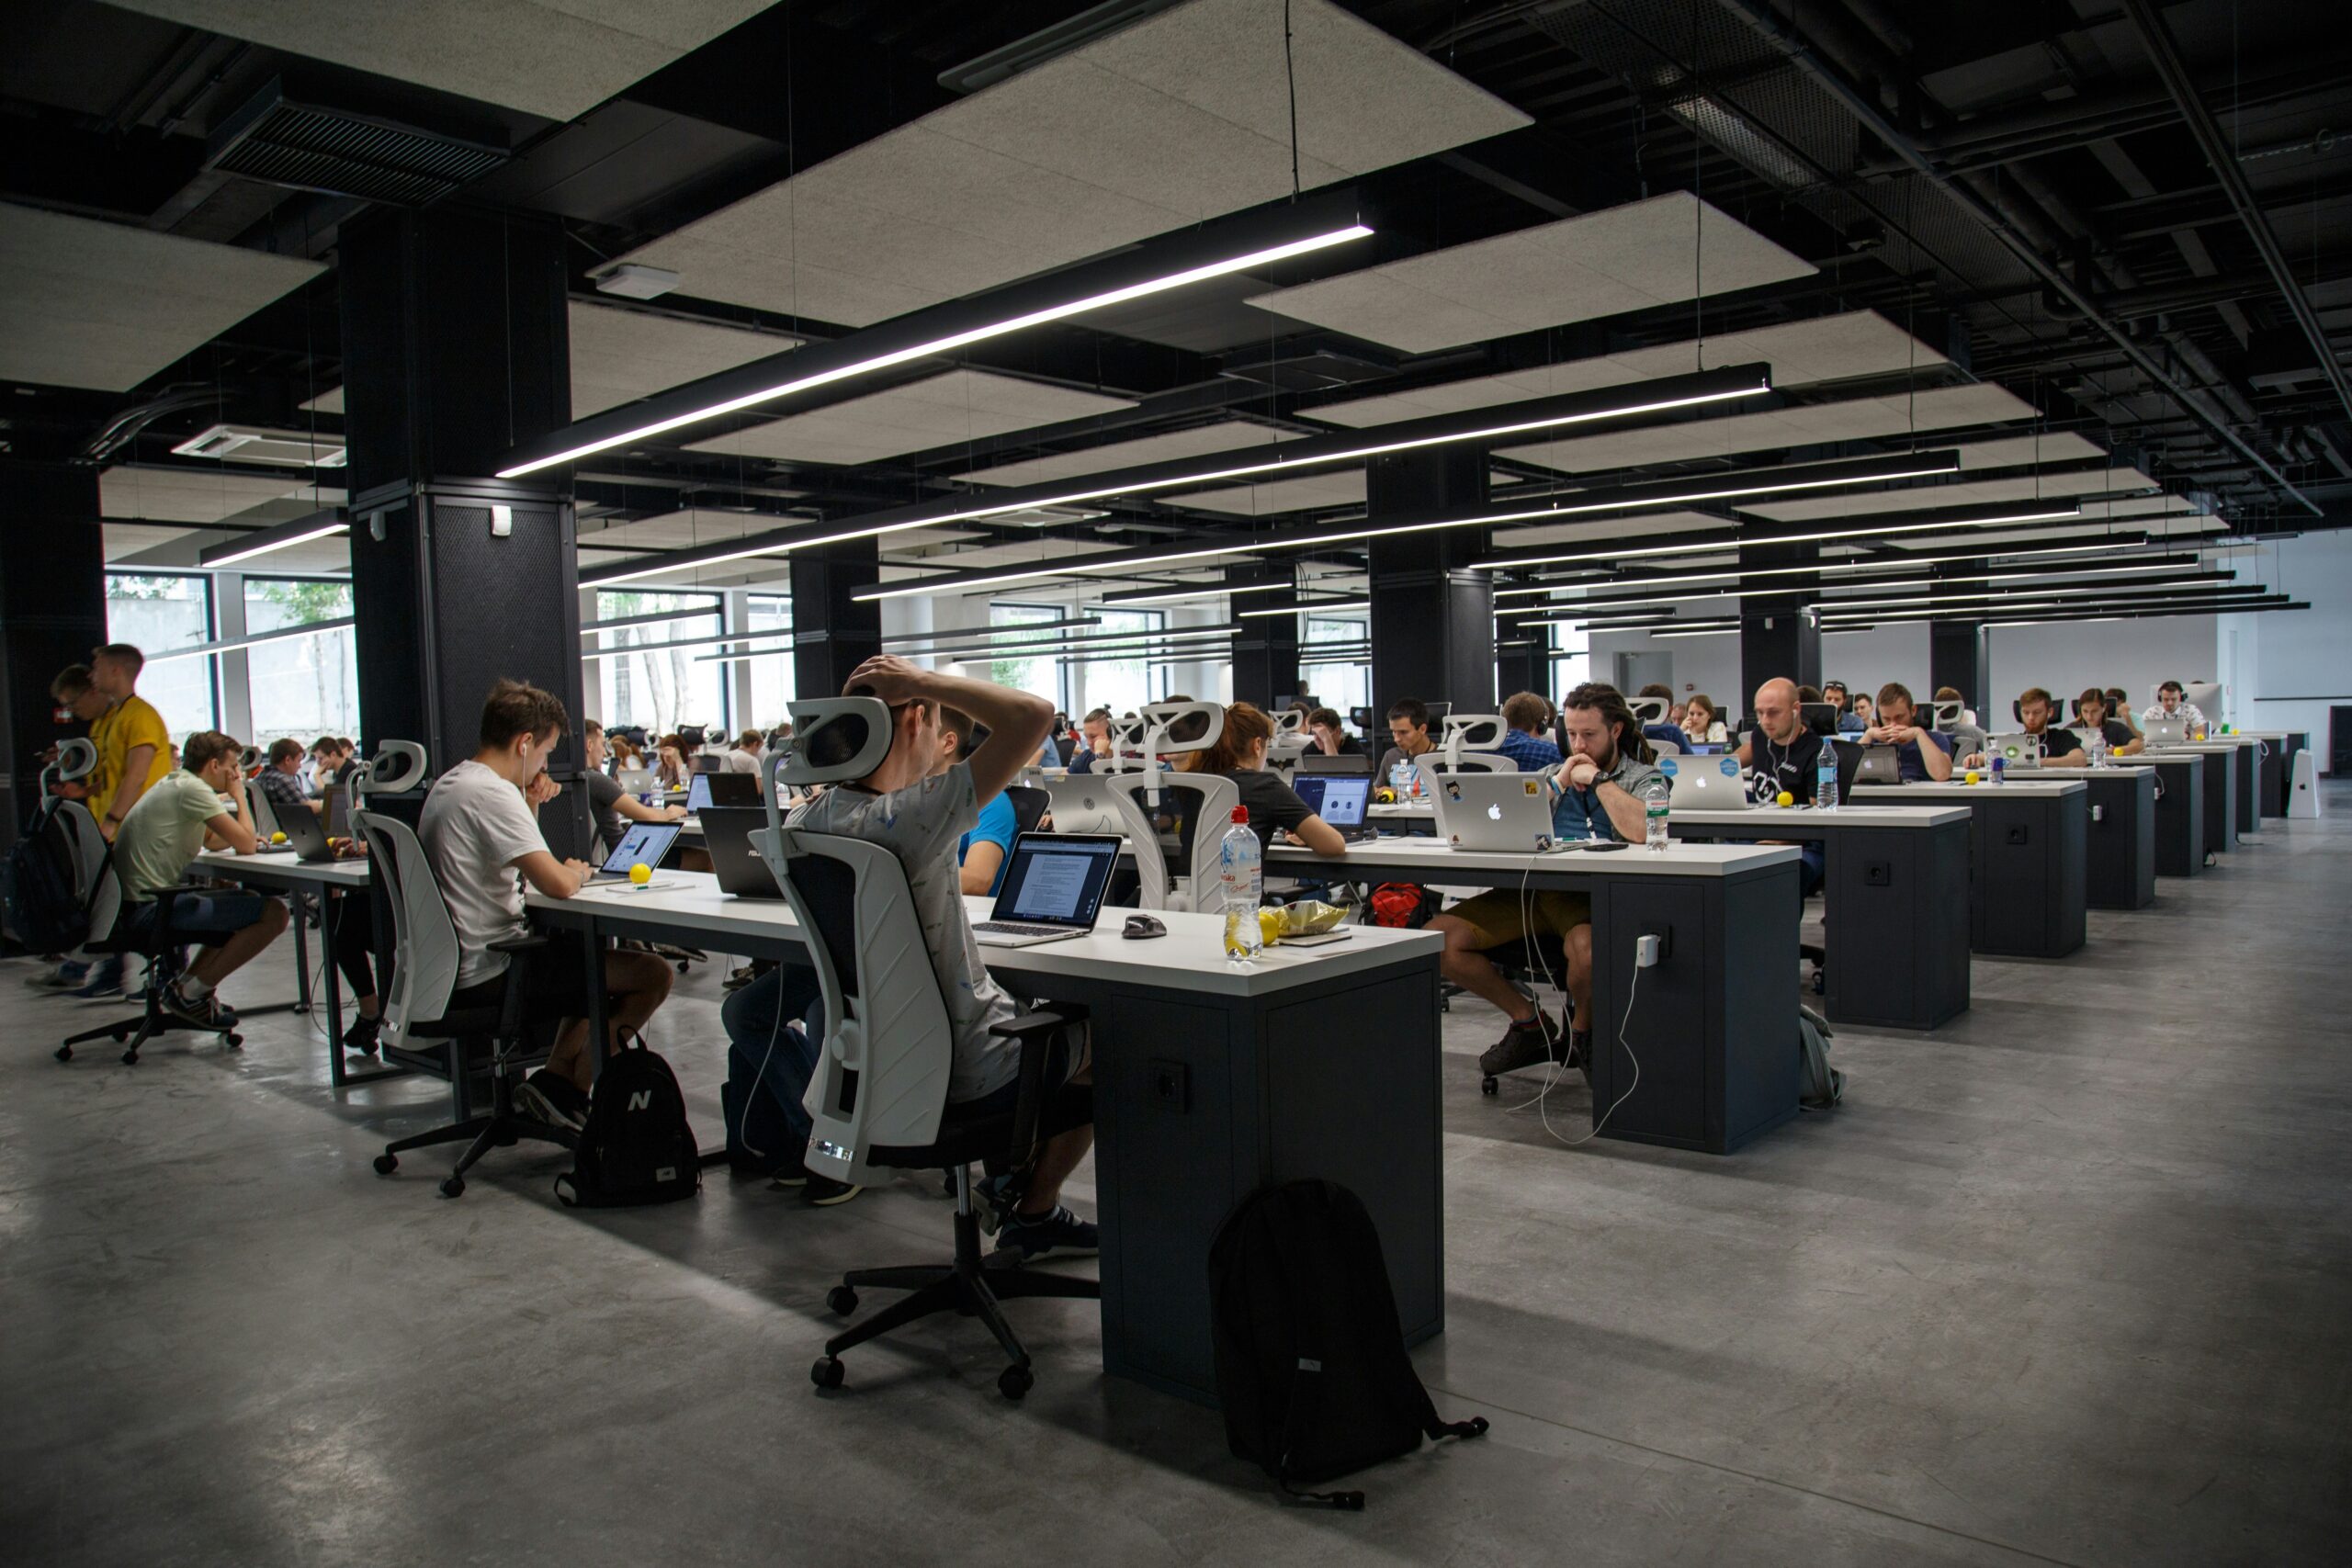 Large open office space with rows of desks and people working